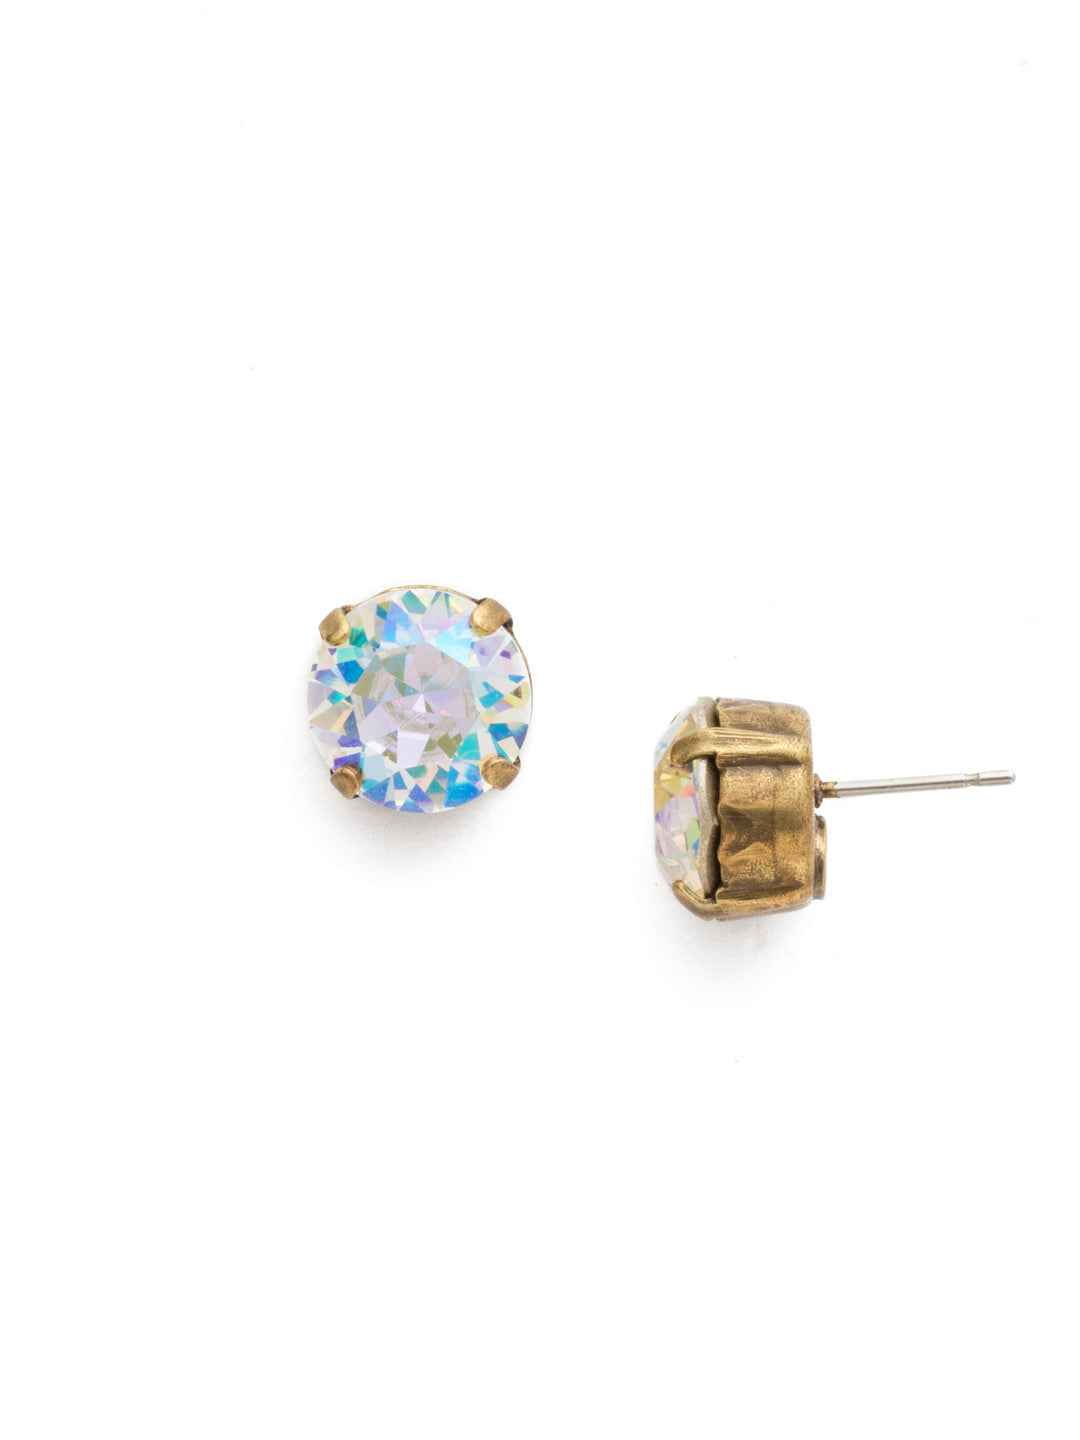 London Stud Earrings - ECM14AGCAB - <p>Everyone needs a great pair of studs. Add some classic sparkle to any occasion with these stud earrings. From Sorrelli's Crystal Aurora Borealis collection in our Antique Gold-tone finish.</p>